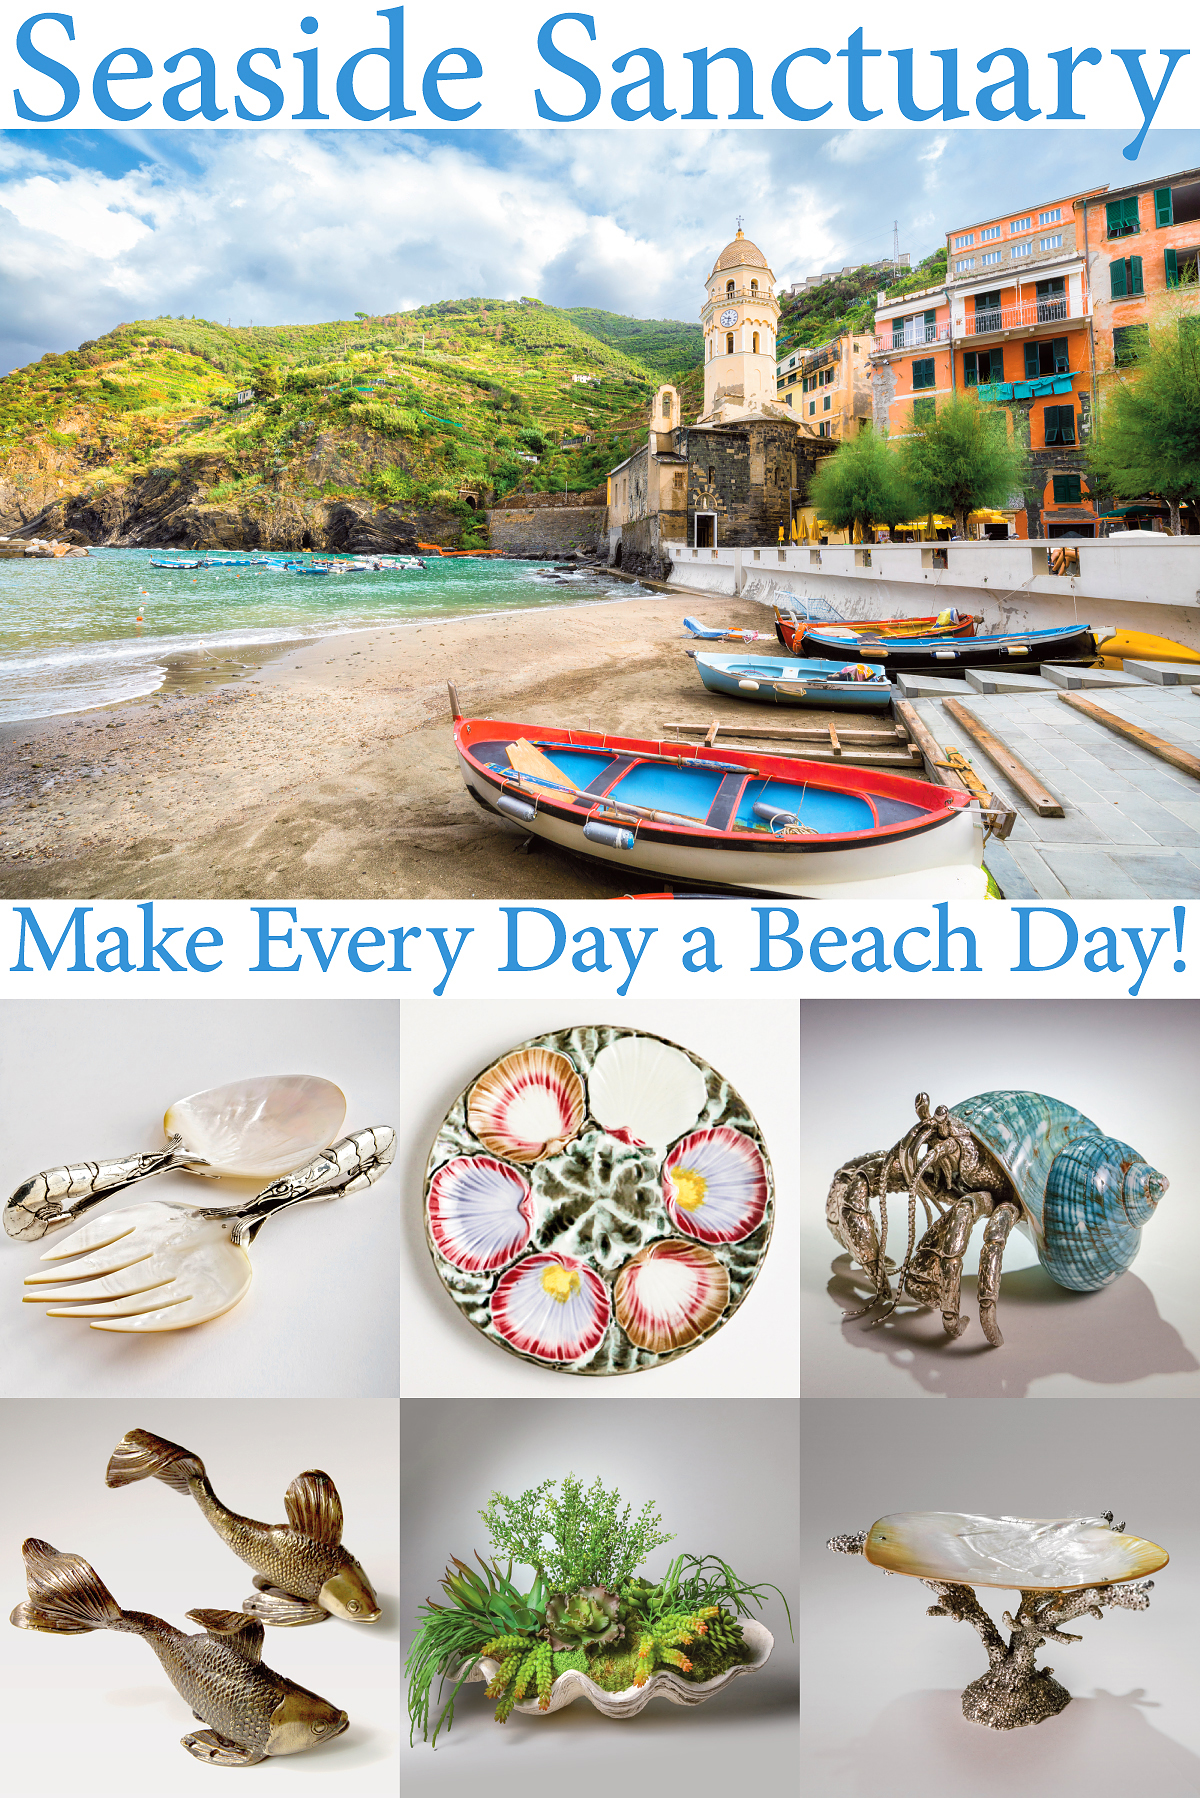 Make Every Day a Beach Day!